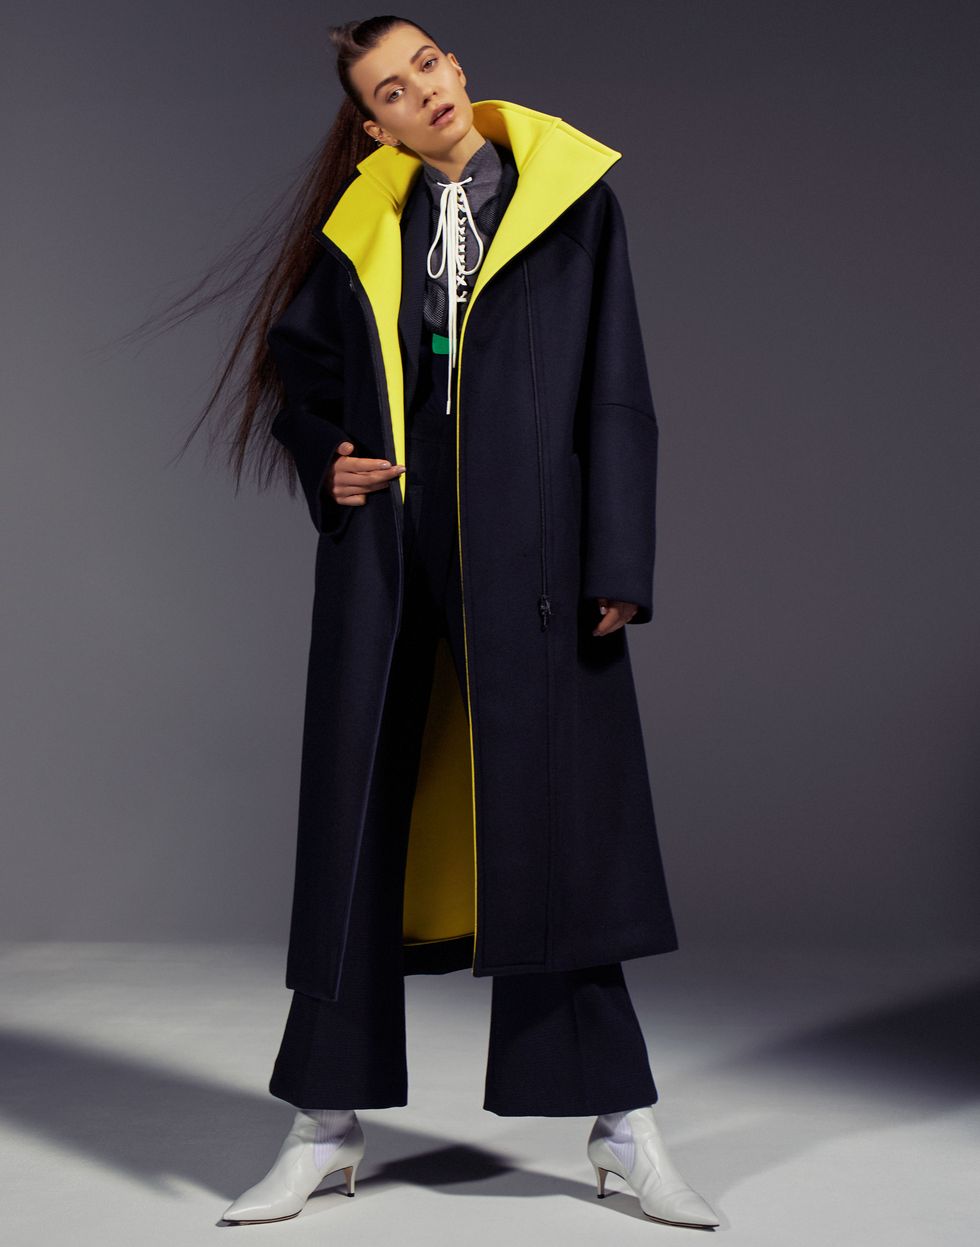 Clothing, Outerwear, Academic dress, Yellow, Fashion, Robe, Cloak, Overcoat, Mantle, Formal wear, 